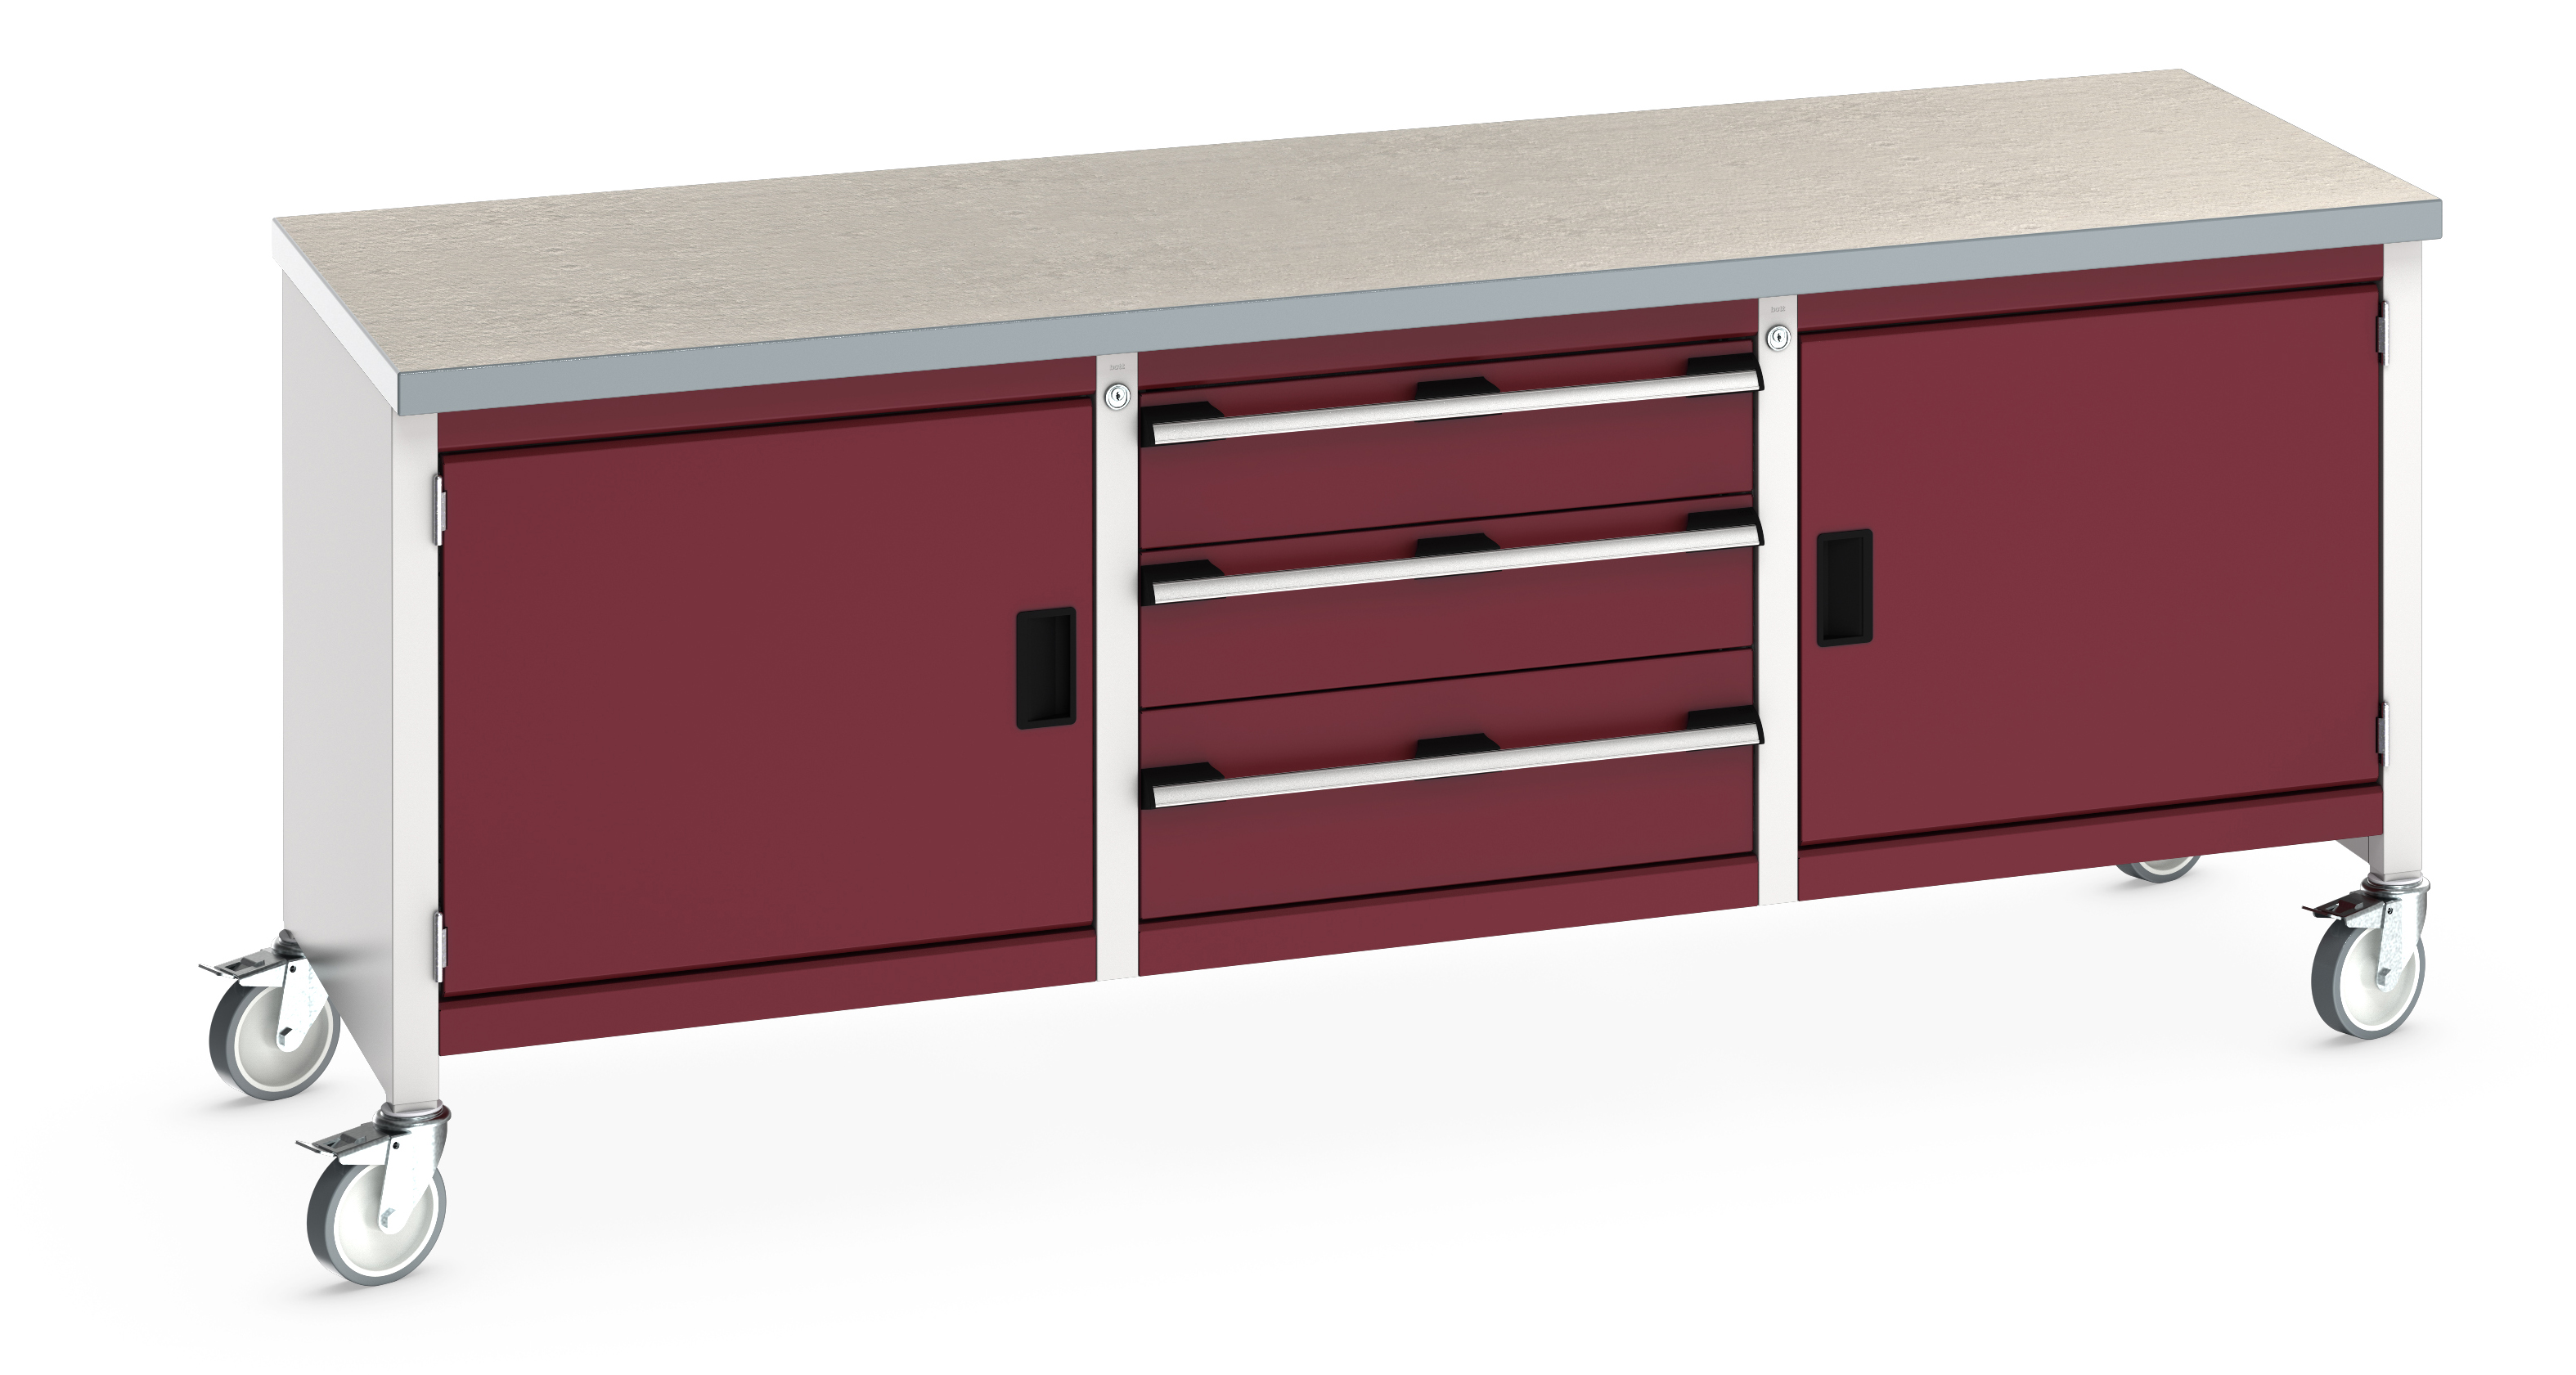 Bott Cubio Mobile Storage Bench With Full Cupboard / 3 Drawer Cabinet / Full Cupboard - 41002126.24V